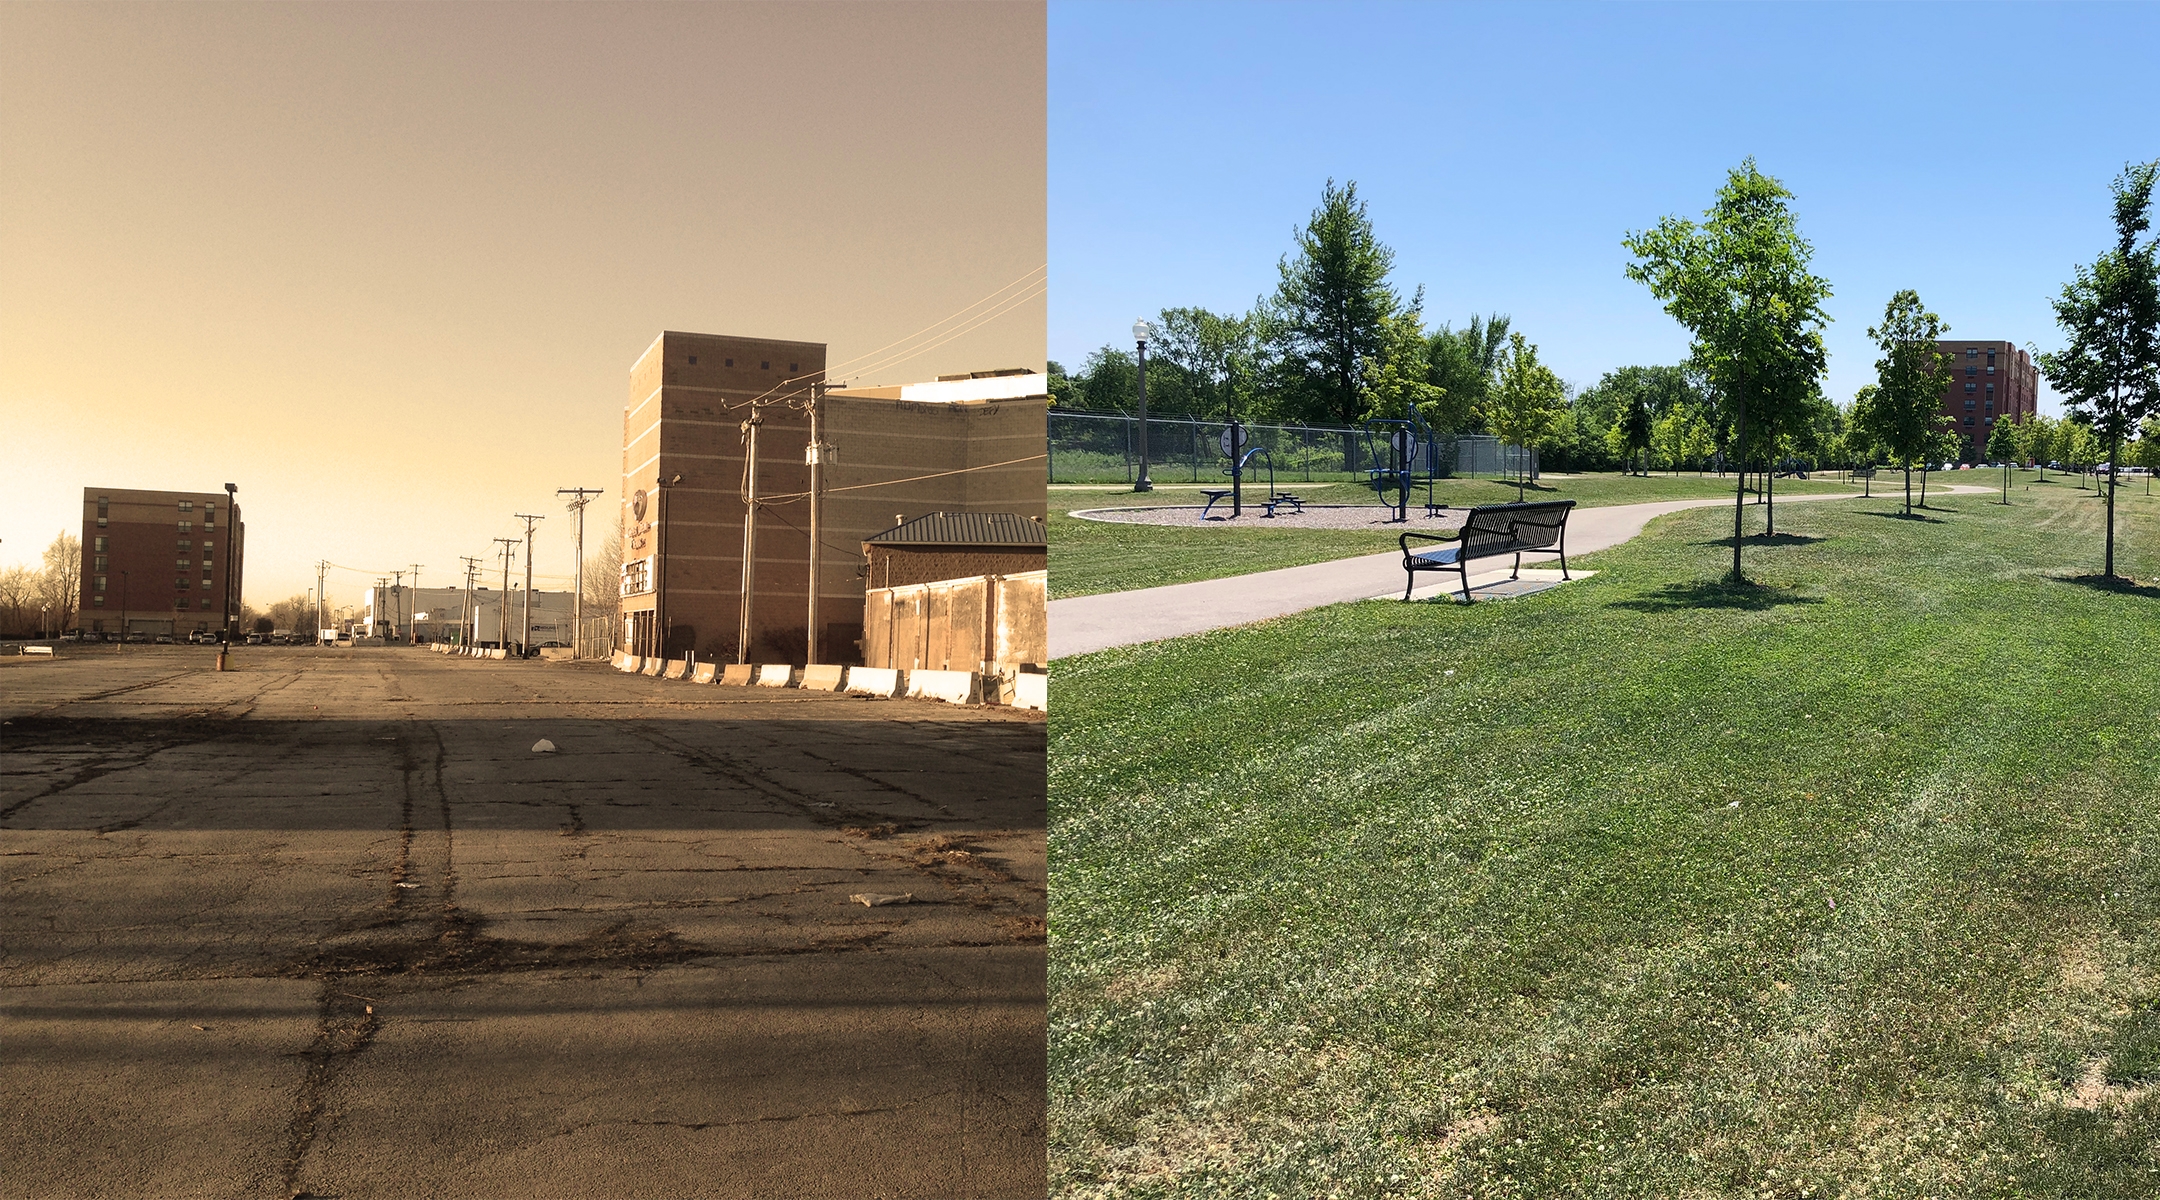 The Jewish Neighborhood Development Council has pushed through a number of urban renewal projects in West Rogers Park, such as turning an abandoned parking lot (left) into a park (right). (Courtesy of Howard Rieger)